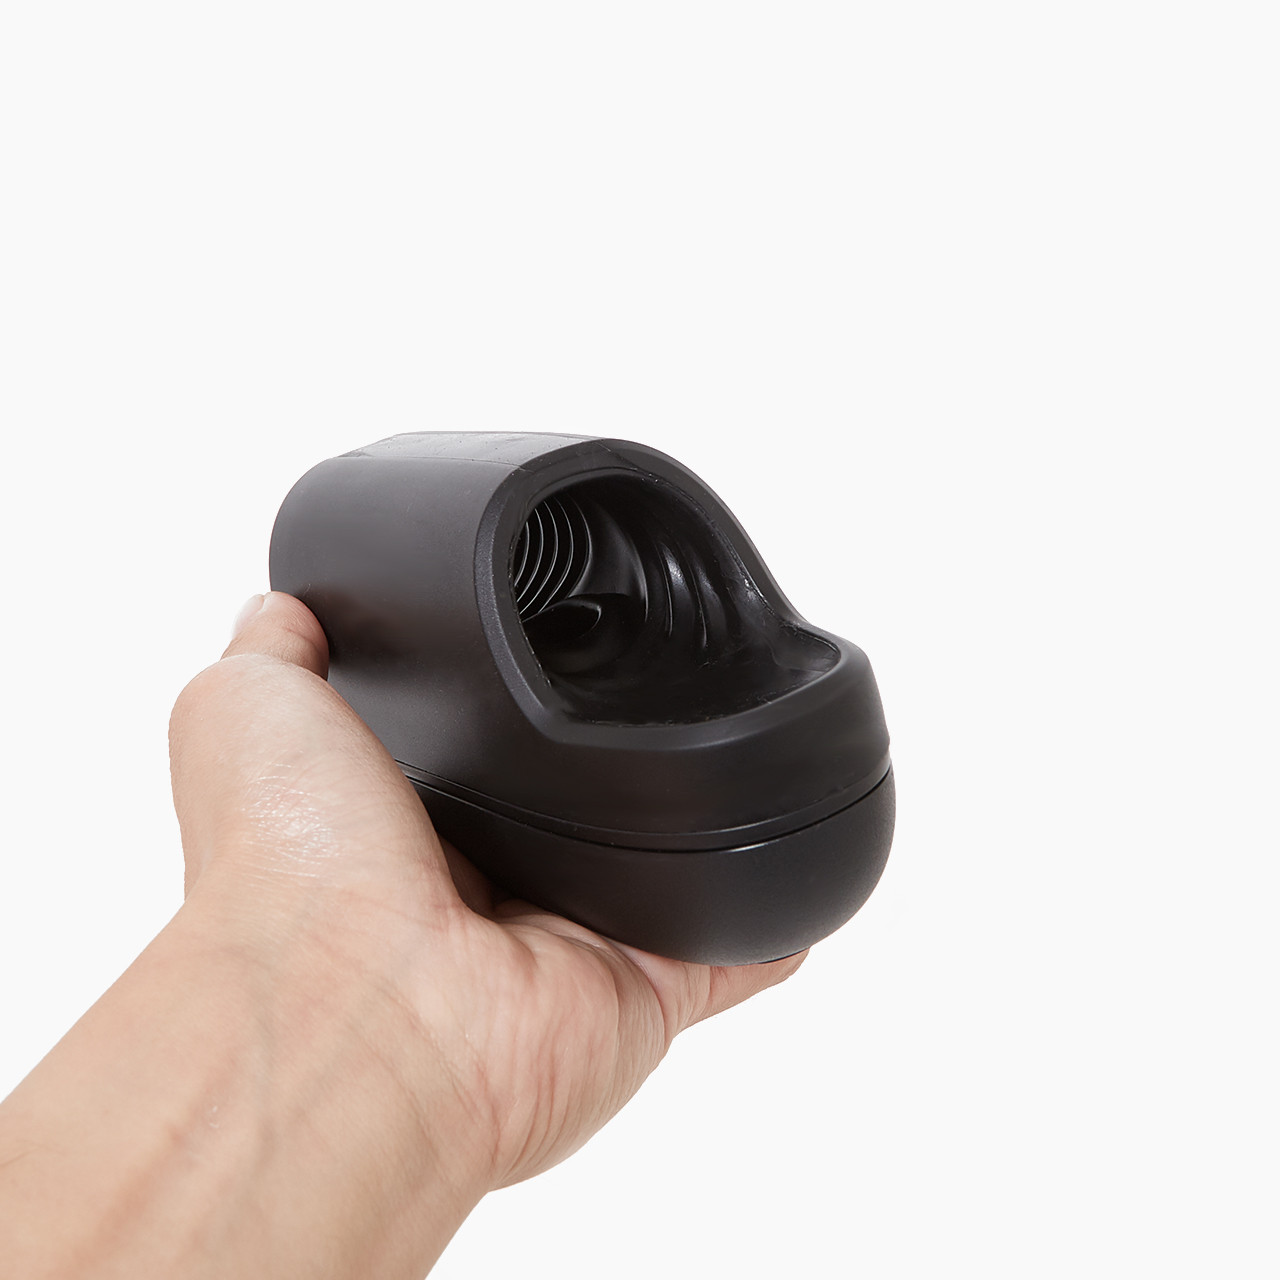 Arcwave Ion vibrating stroker held in hand